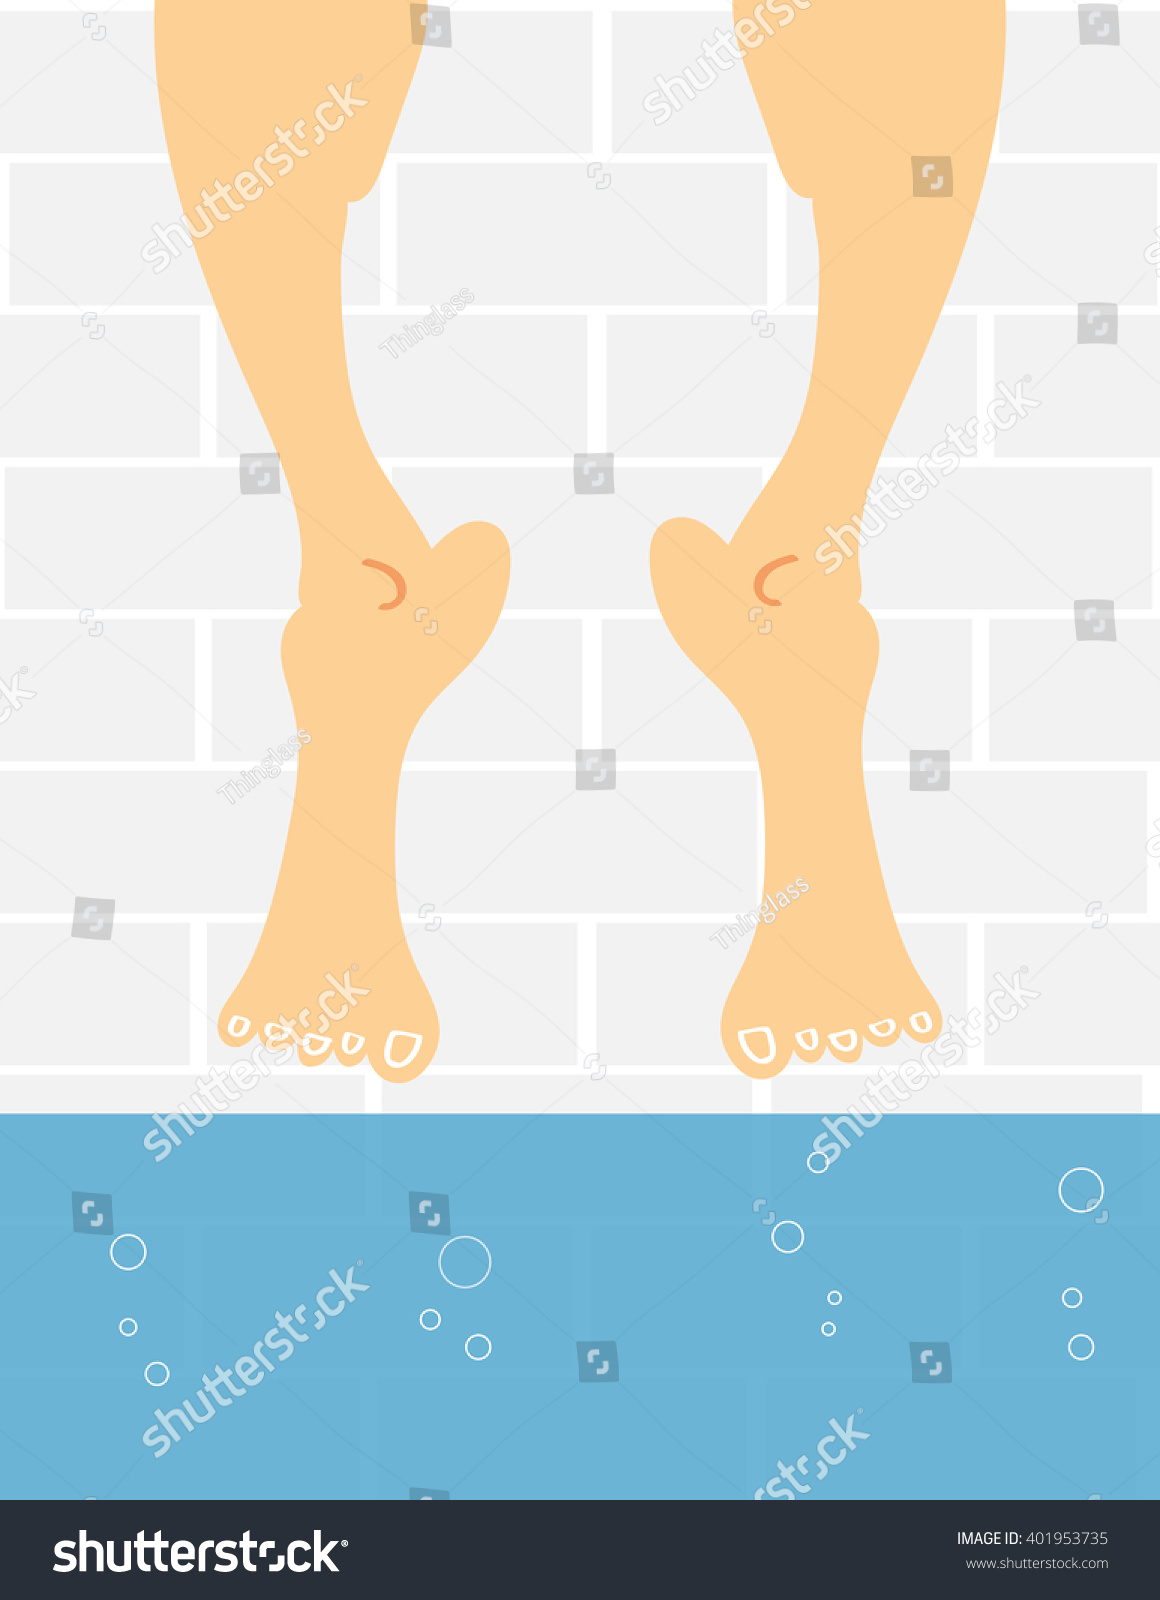 SVG of A pair of male or female feet dangling above the water in a swimming pool as if the person is afraid to take the plunge and get their feet wet svg